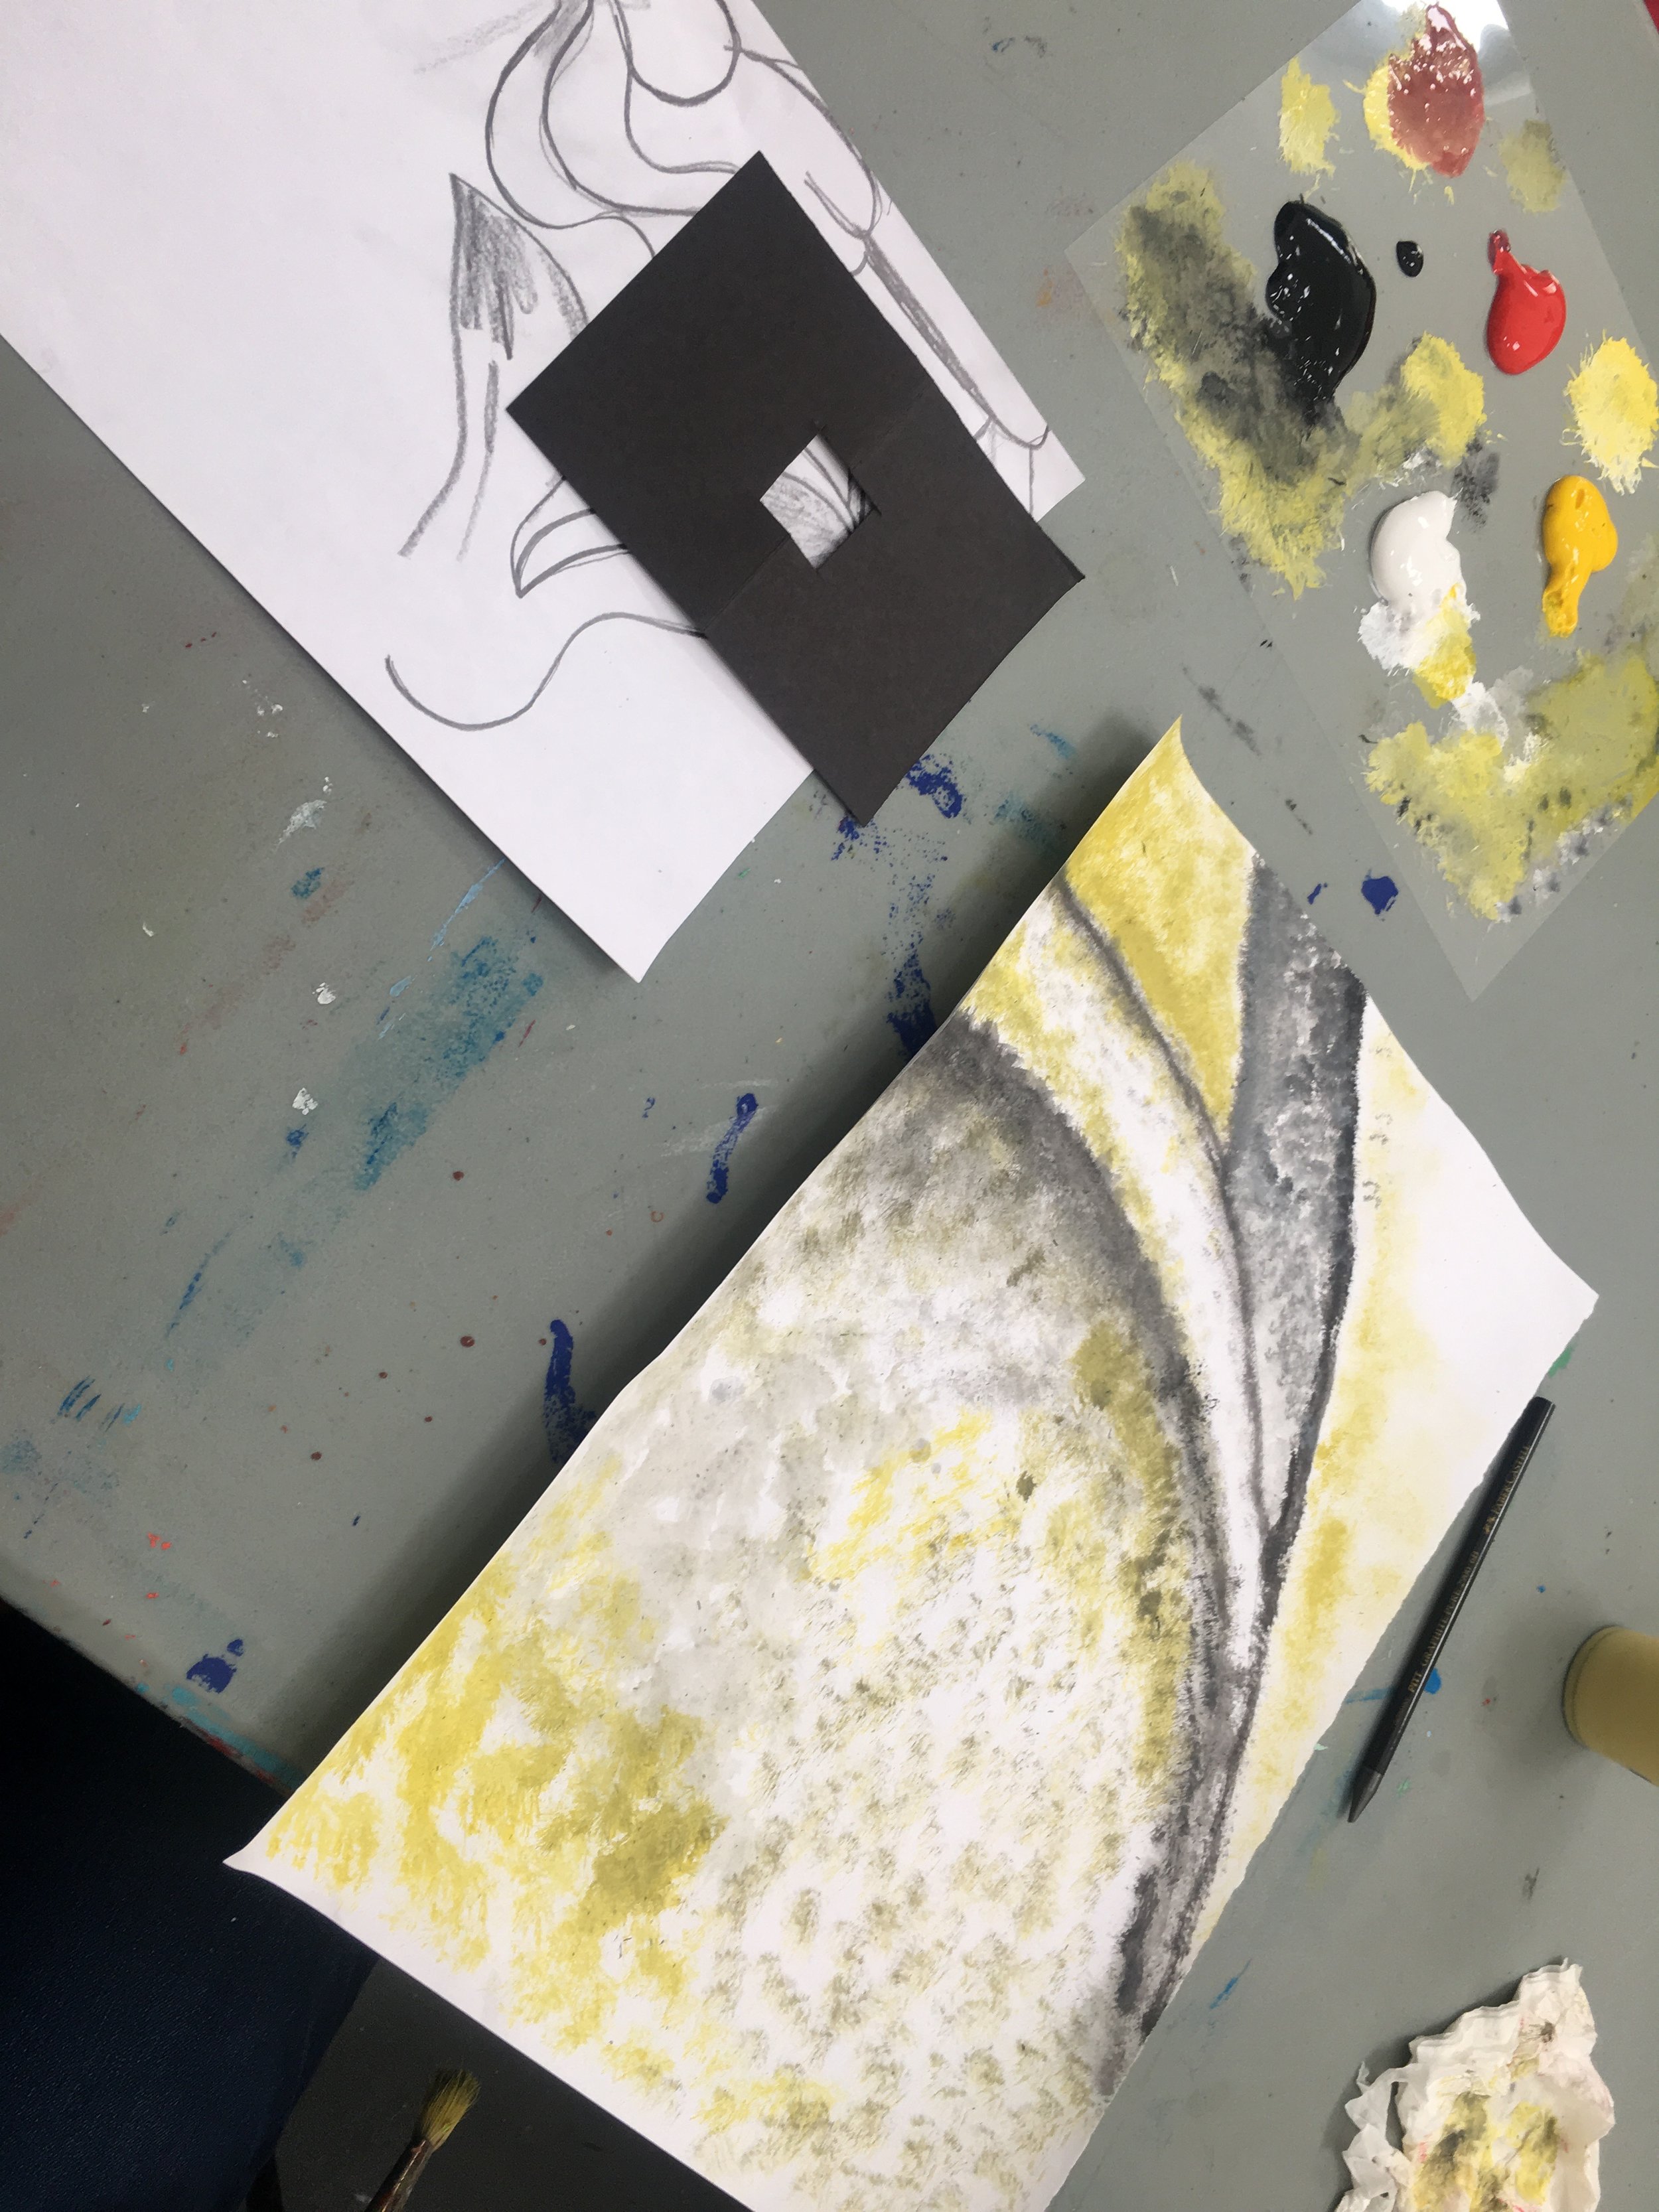  Participants created frames to isolate details on their drawings, these details were then blown up into an abstract composition in a second artwork 